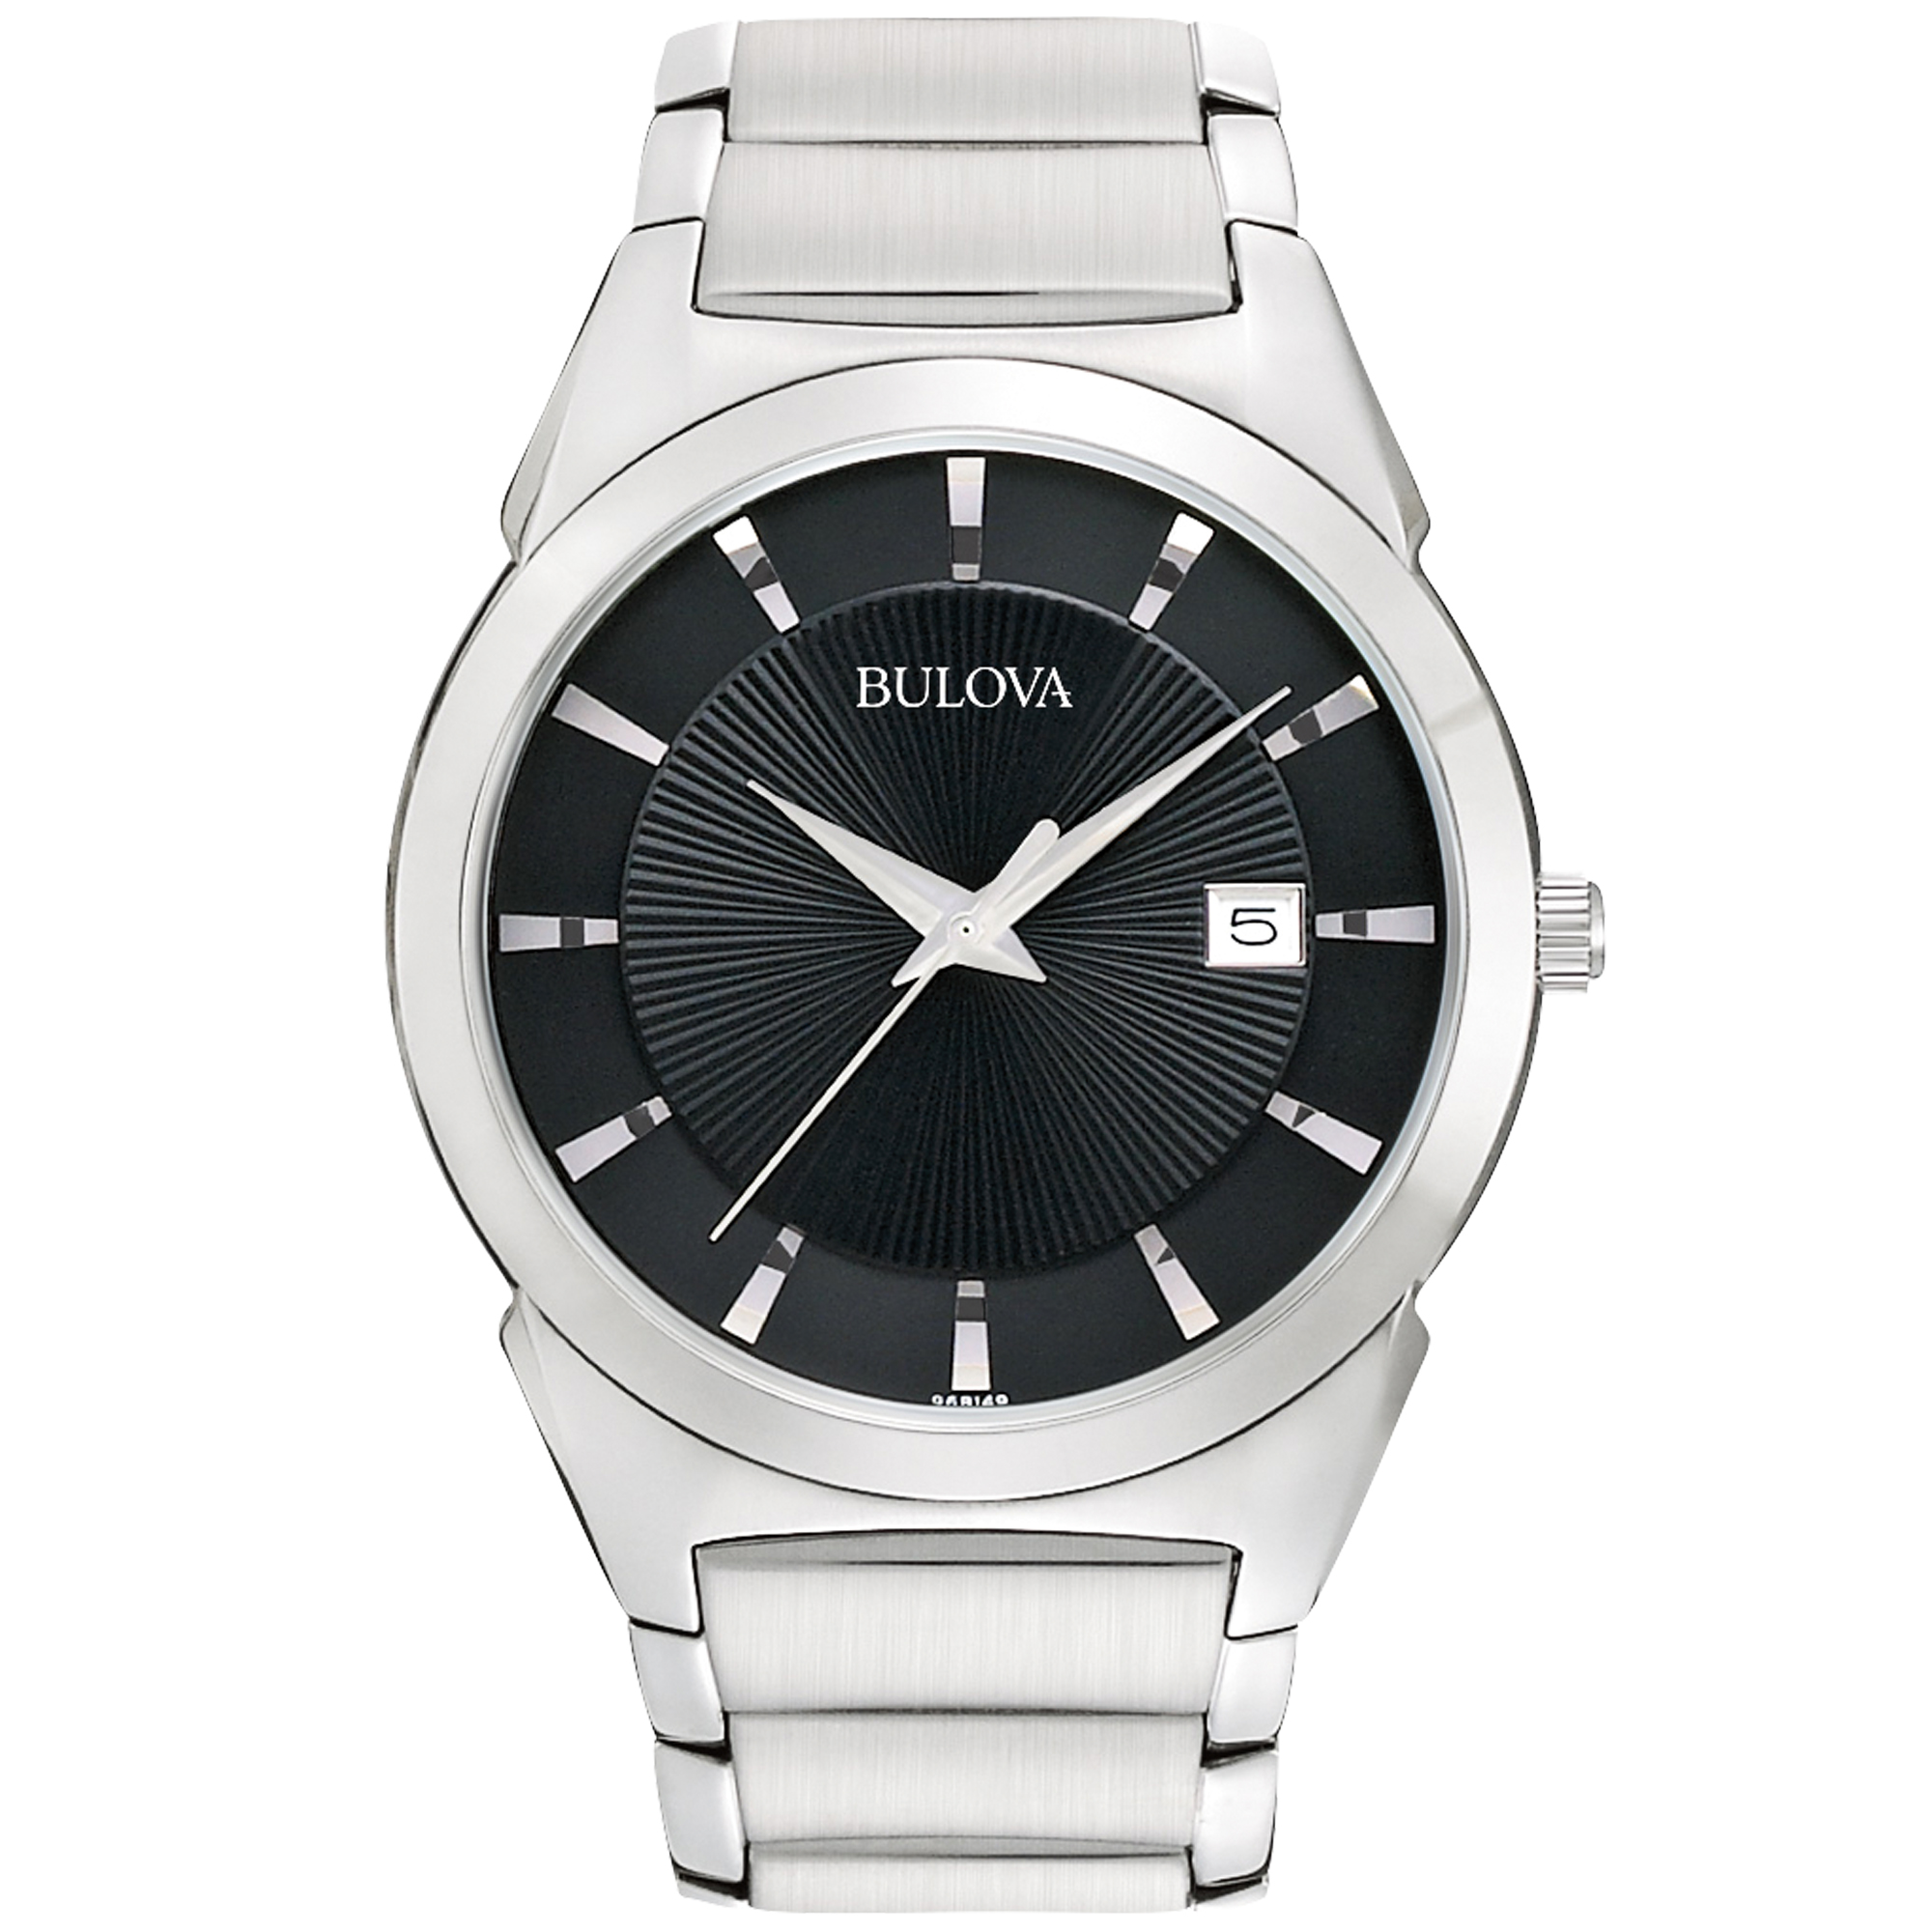 Bulova Men's Stainless Steel Watch with Domed Crystal, Black Dial